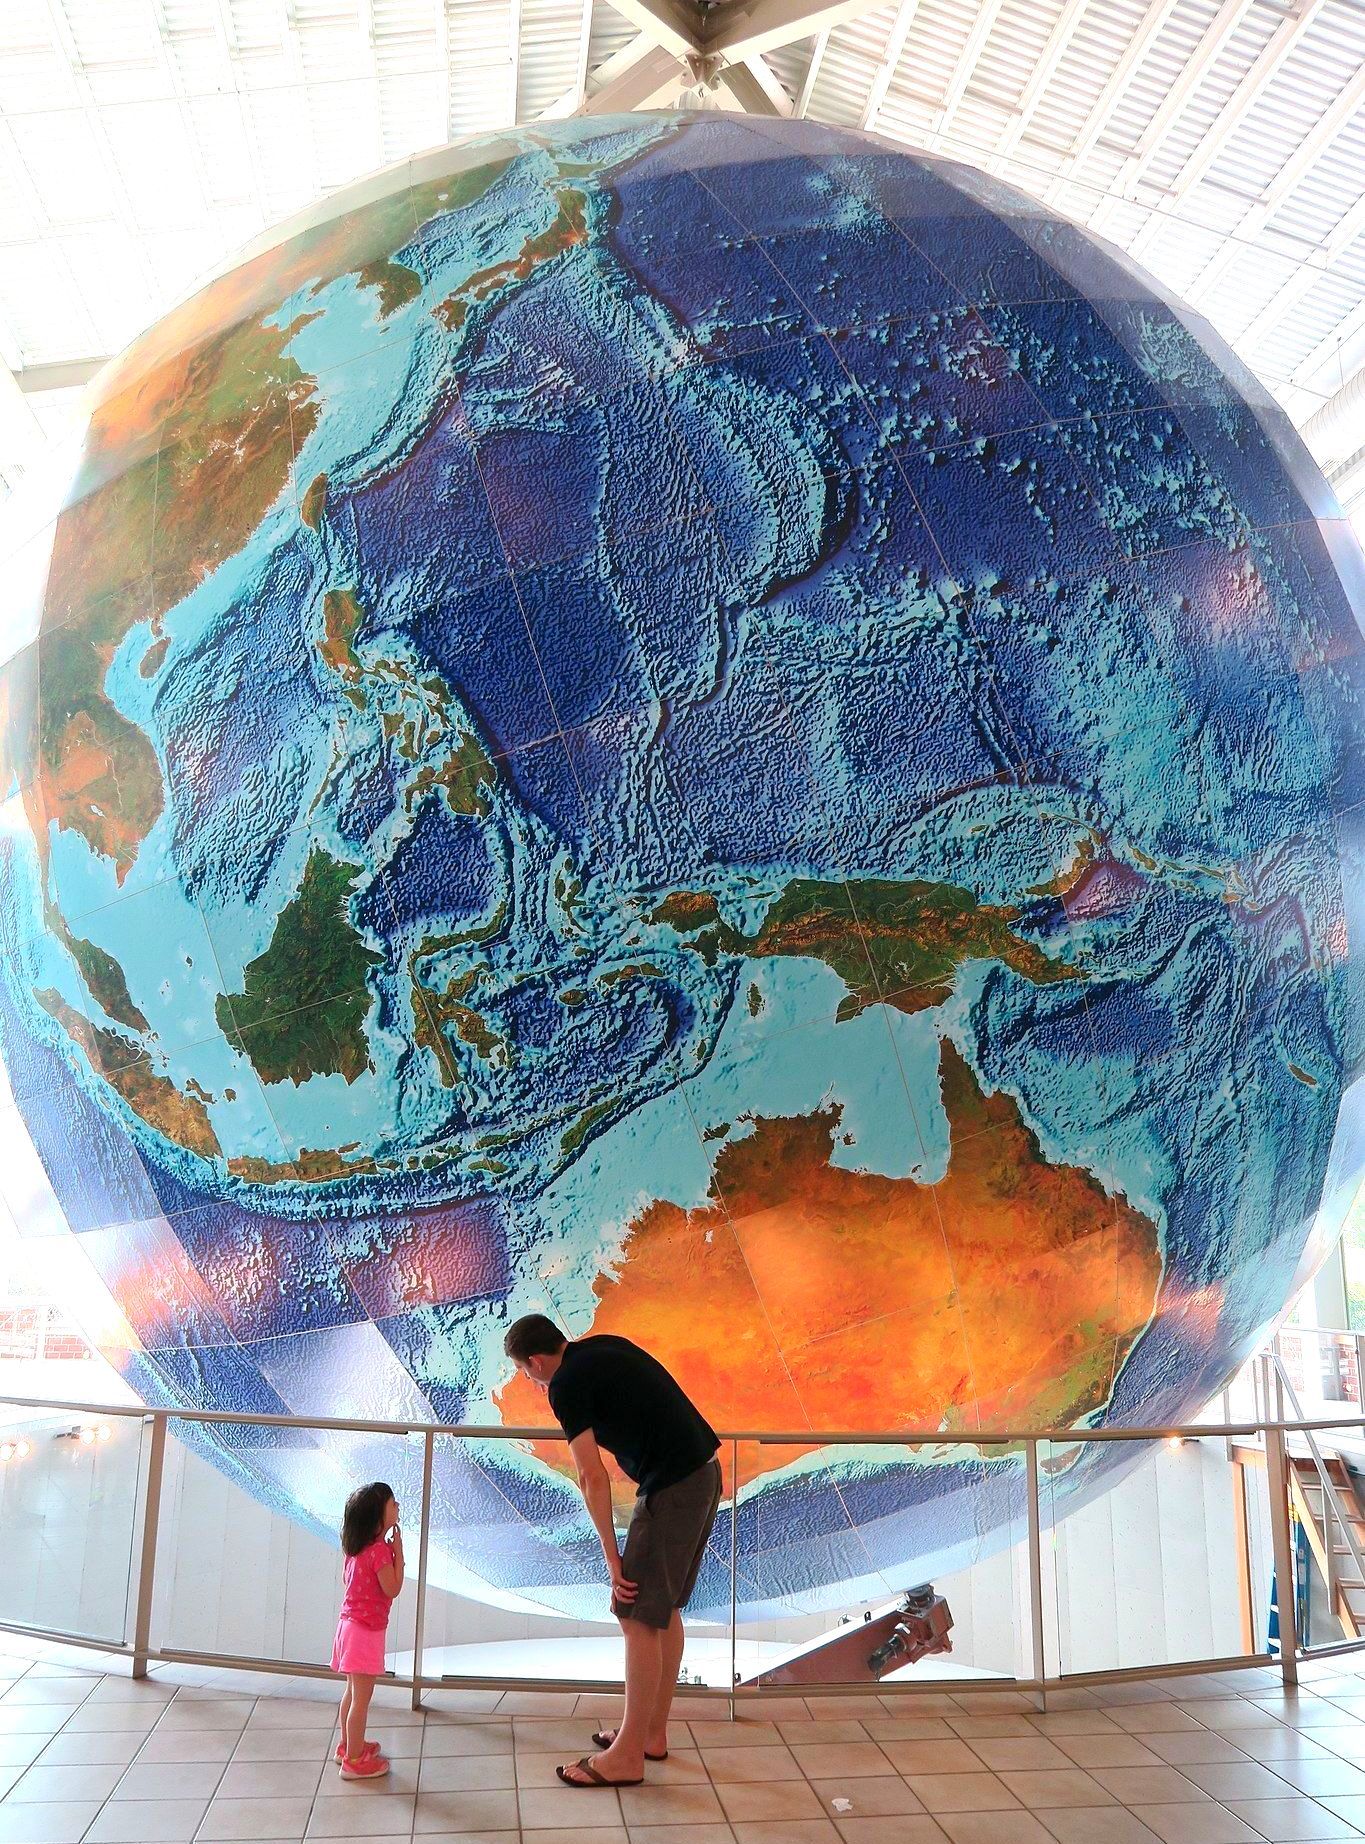 
World's Largest Rotating and Revolving Globe, world record in Yarmouth, Maine